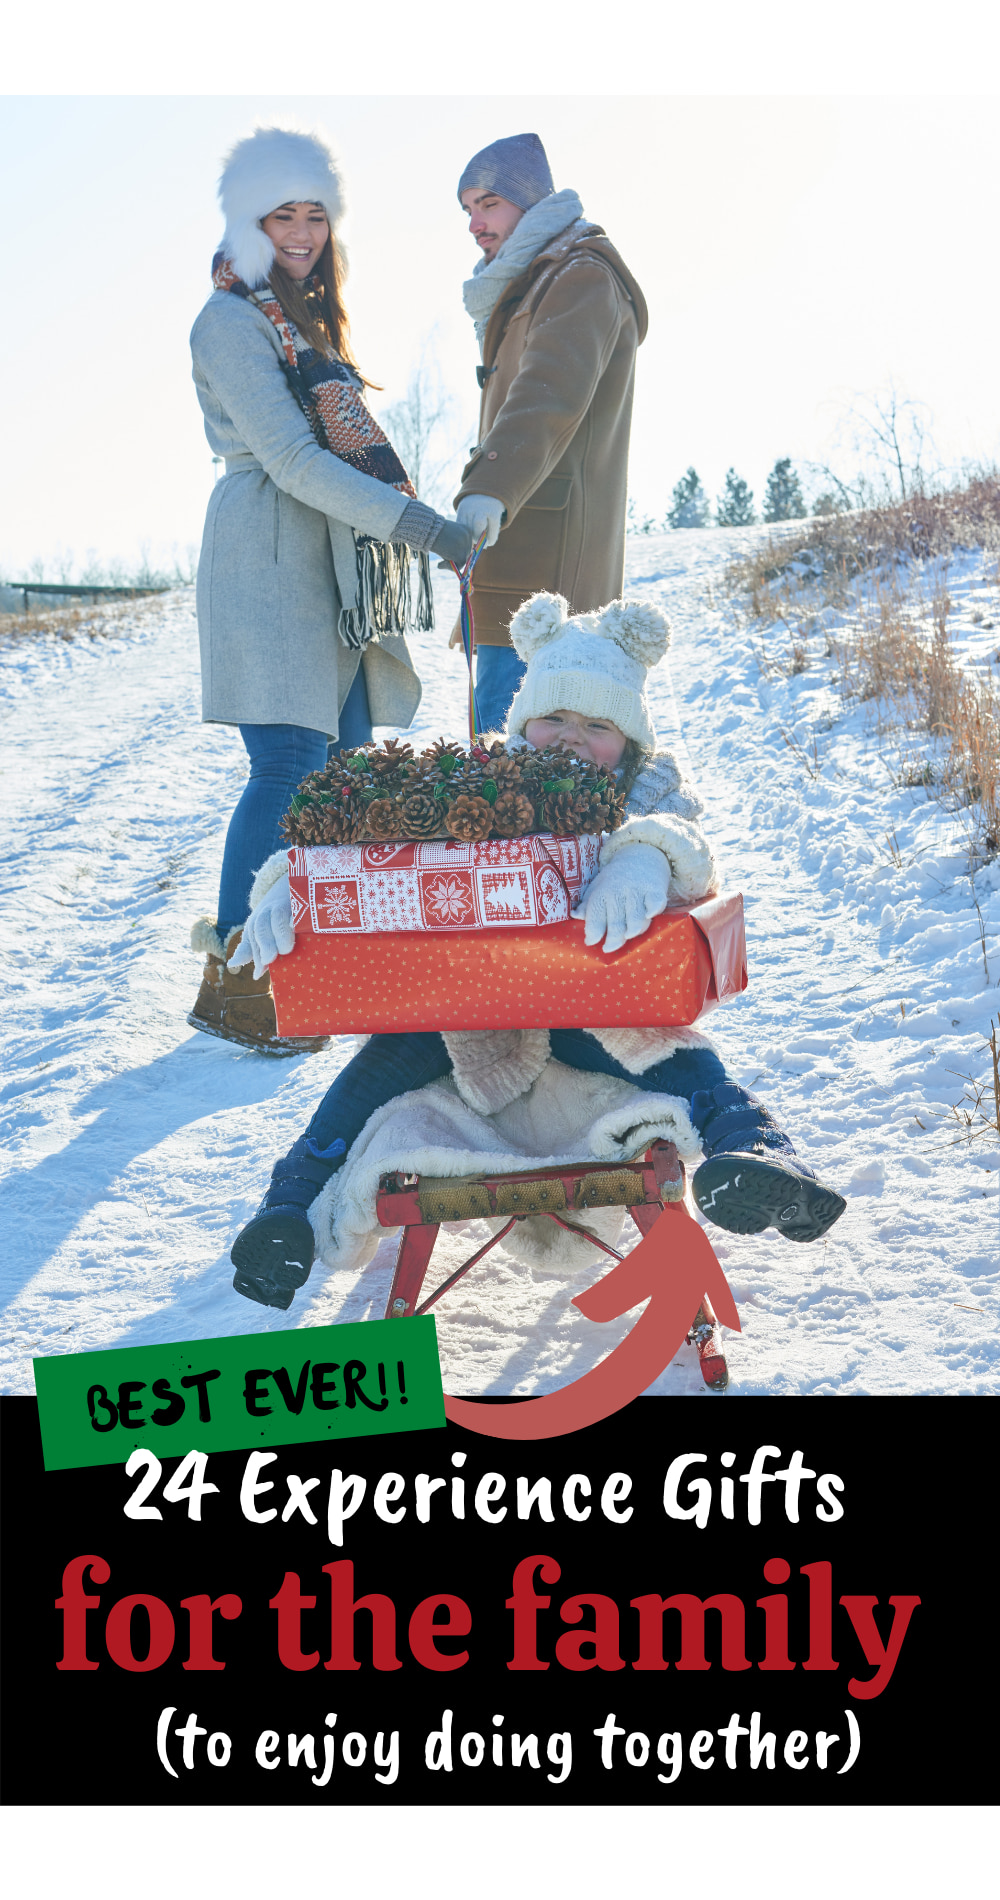 parents pulling a child on a sled with gifts